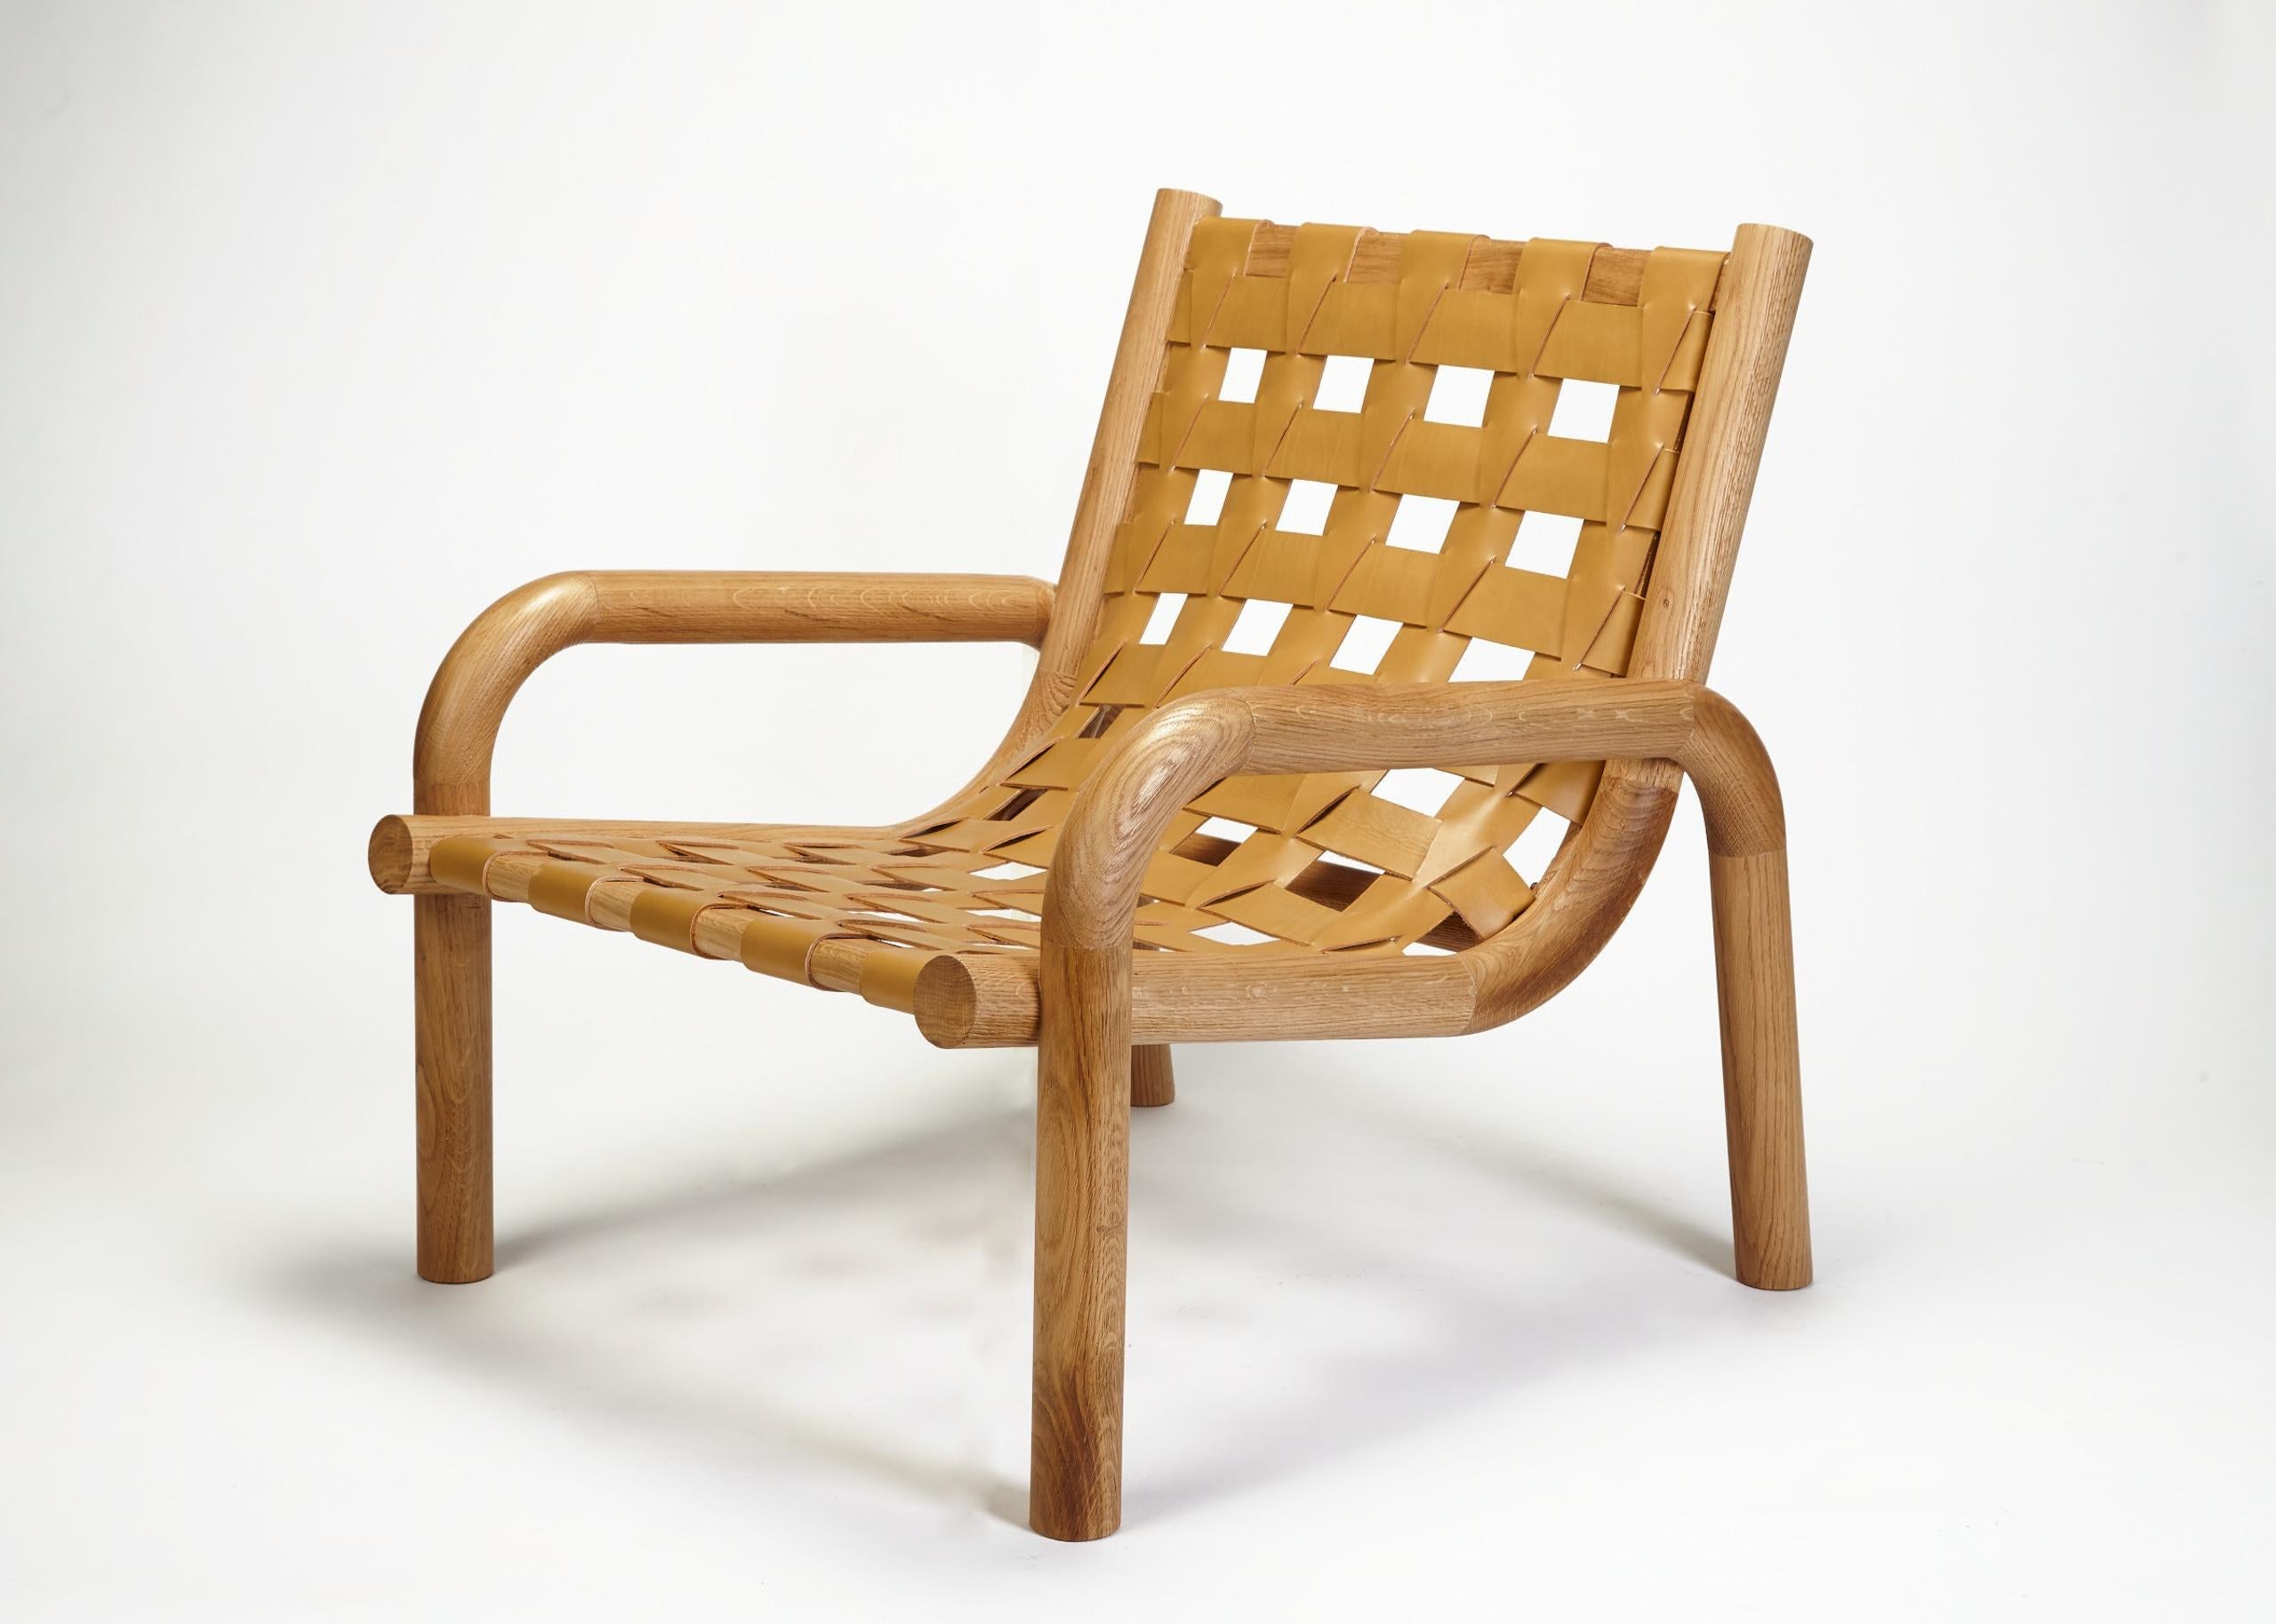 Ginga Leather Armchair, Natural Solid Oak, Handcrafted in Portugal by Duistt

Ginga is the swaying movement of brazilian martial art, capoeira. It is characterized by a flowing movement from one side to another, and this is what ginga armchair